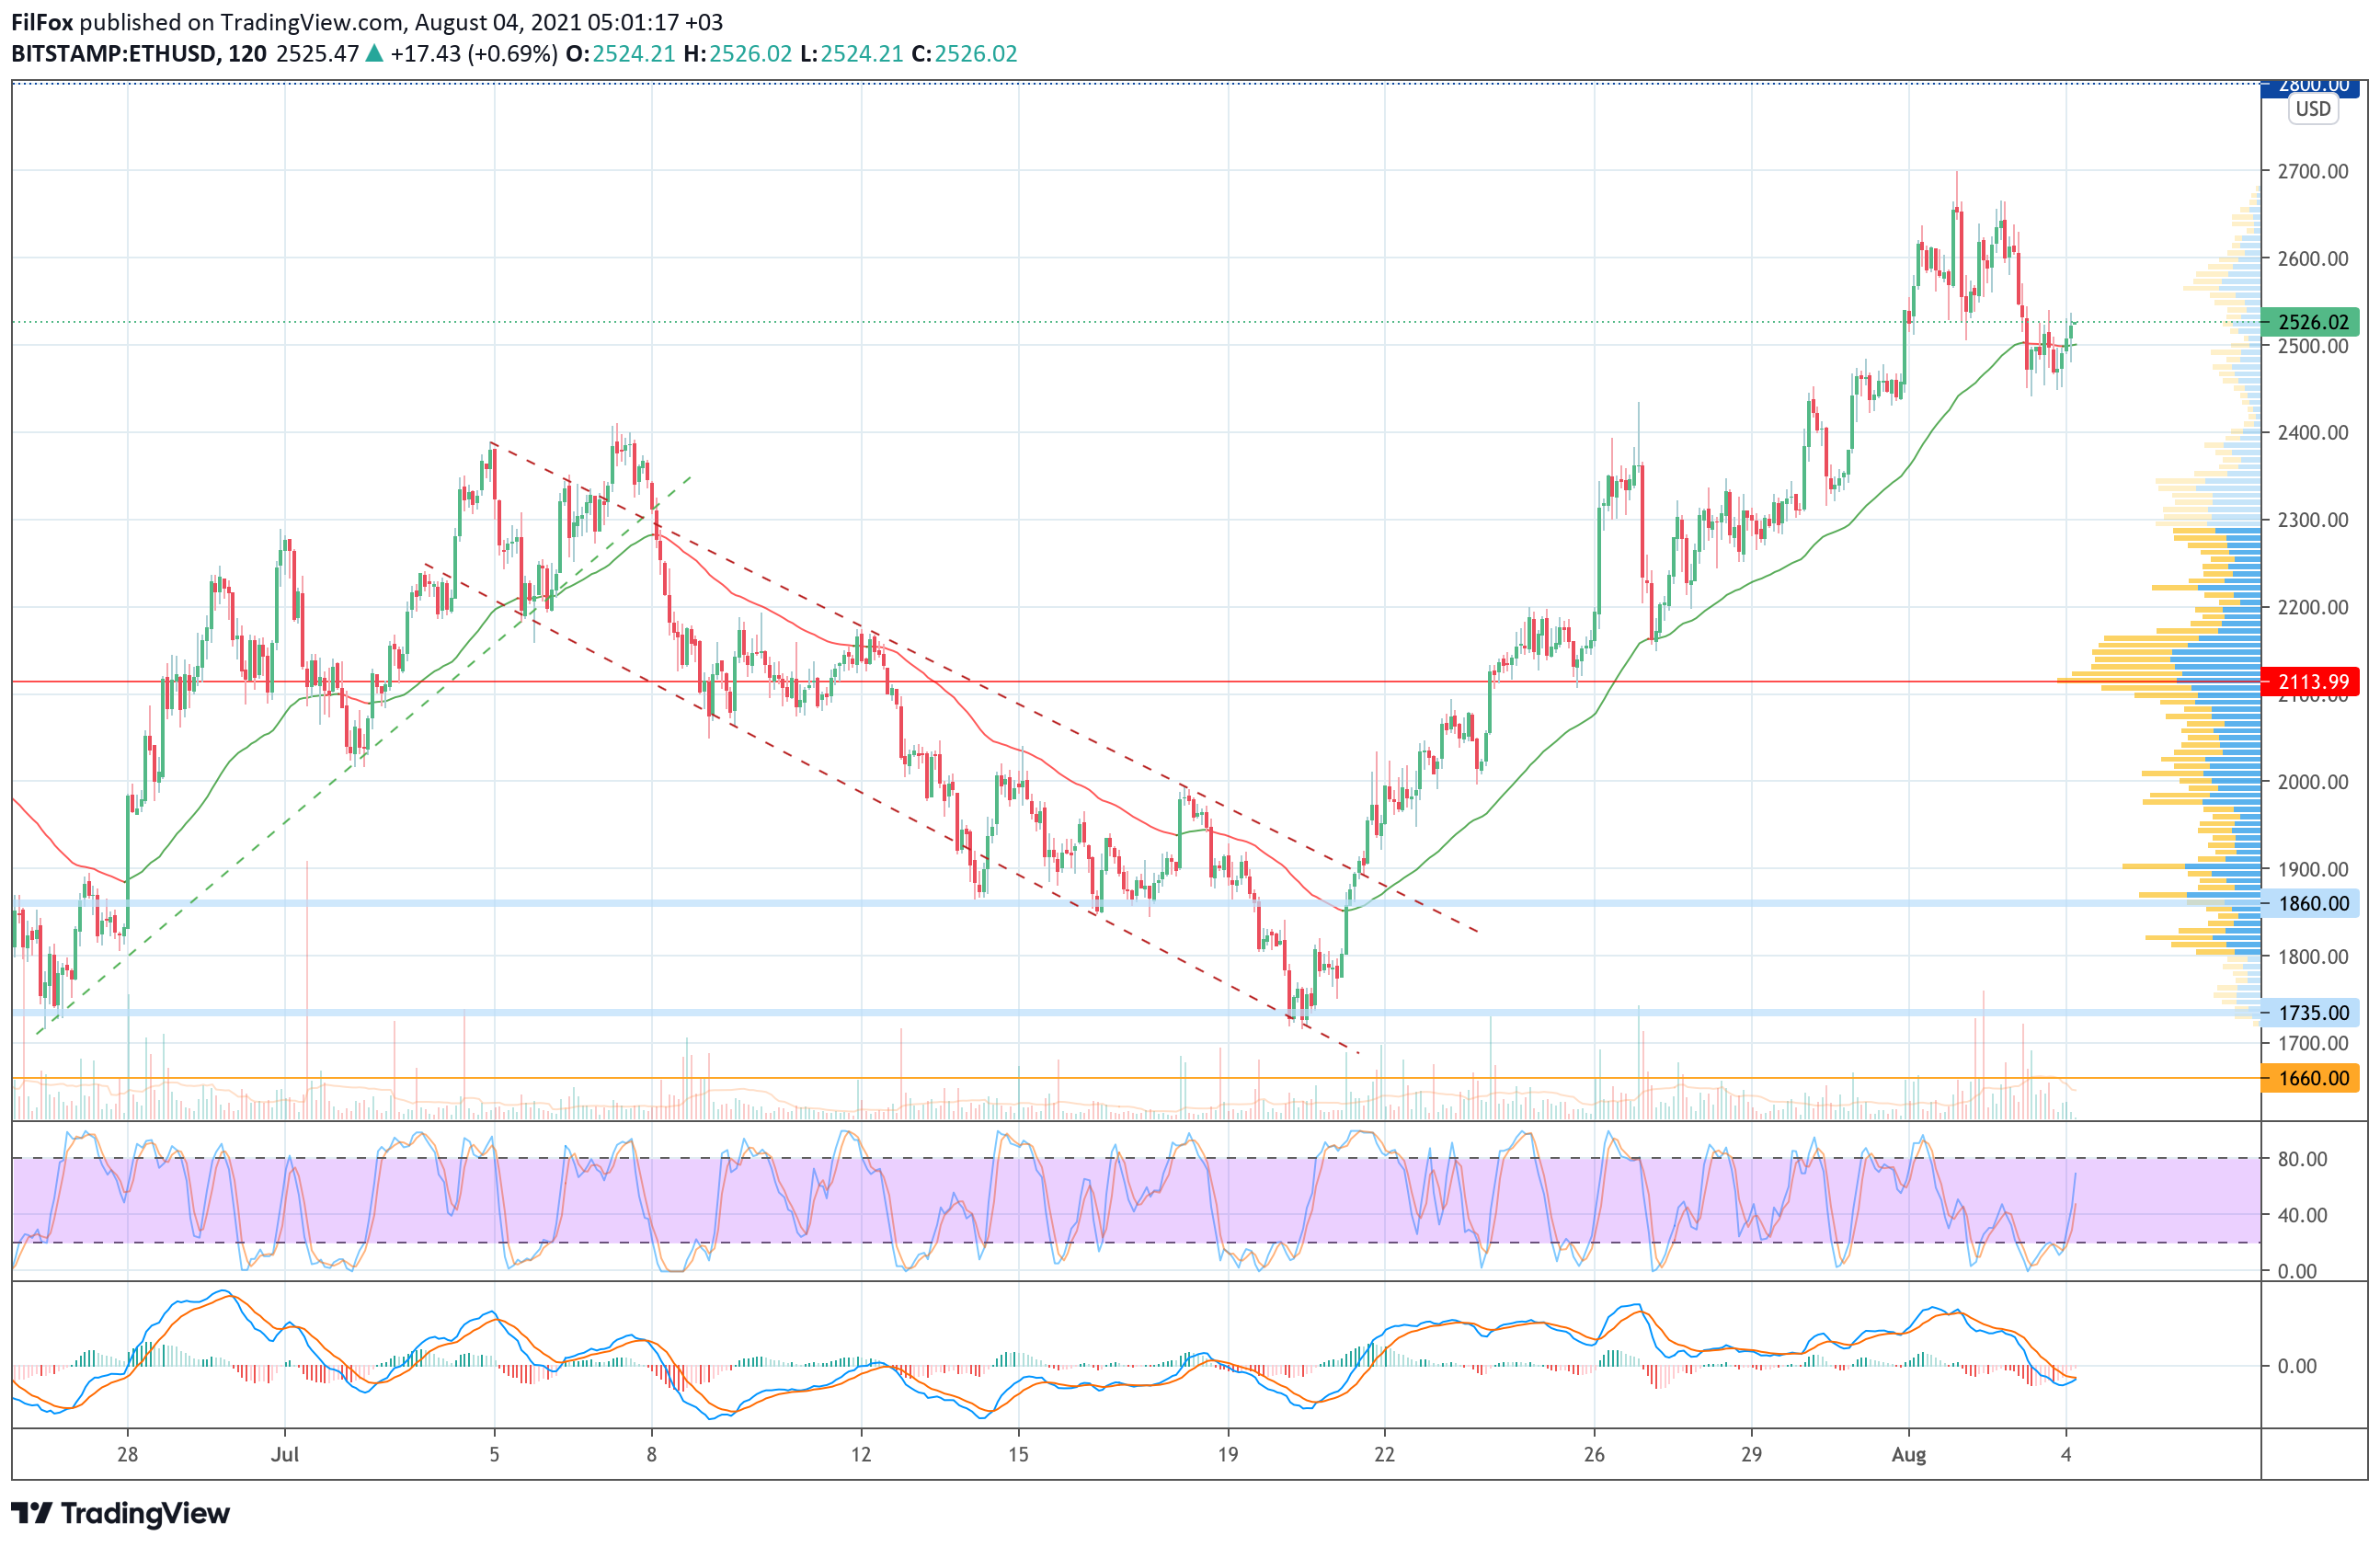 Analysis of prices for Bitcoin, Ethereum, XRP for 08/04/2021